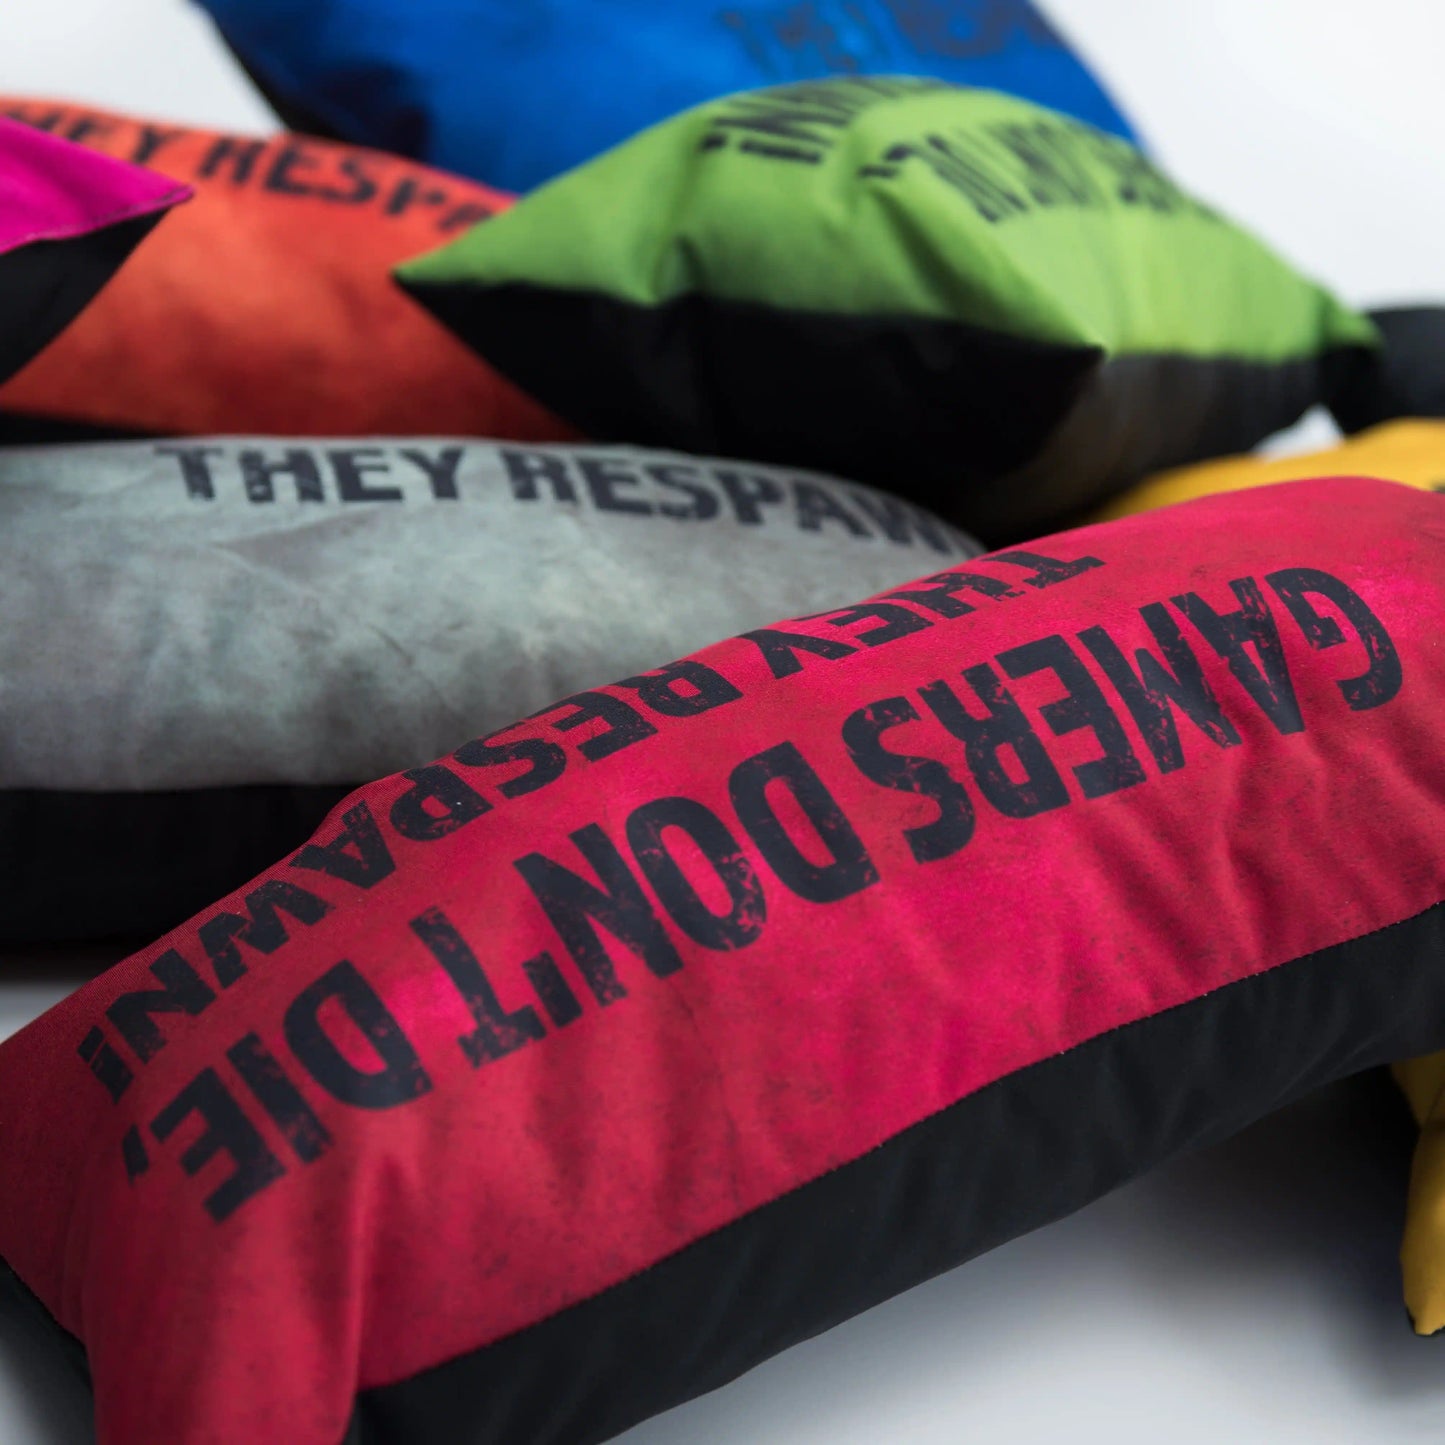 A group of colorful pillows with the words "GAMERS DON'T DIE KEY RESPAWN THEY RESPAW PY RESP".